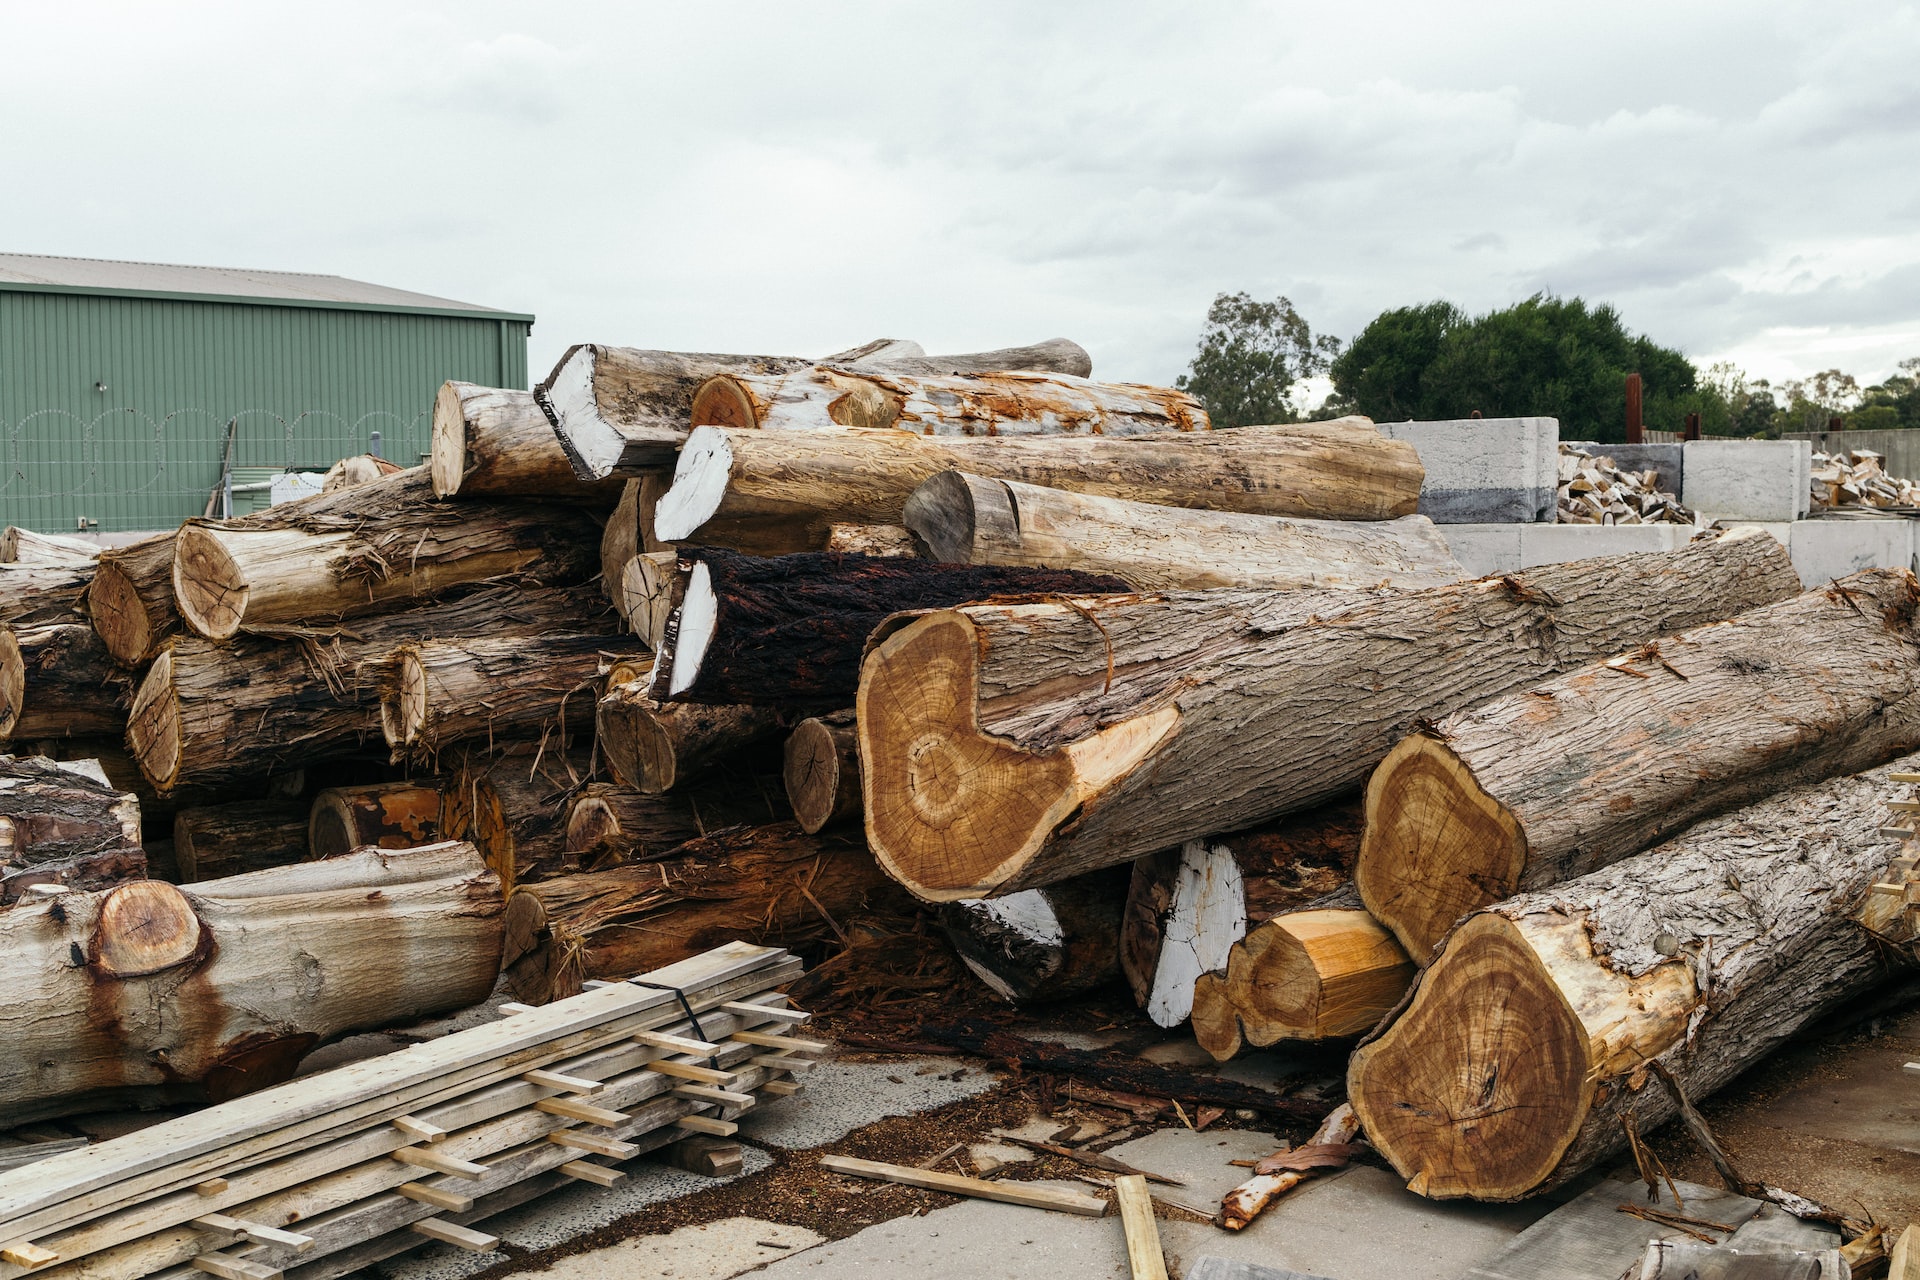 Sustainable Wood Management: How to Ensure That Wood is Harvested Responsibly and Replanted